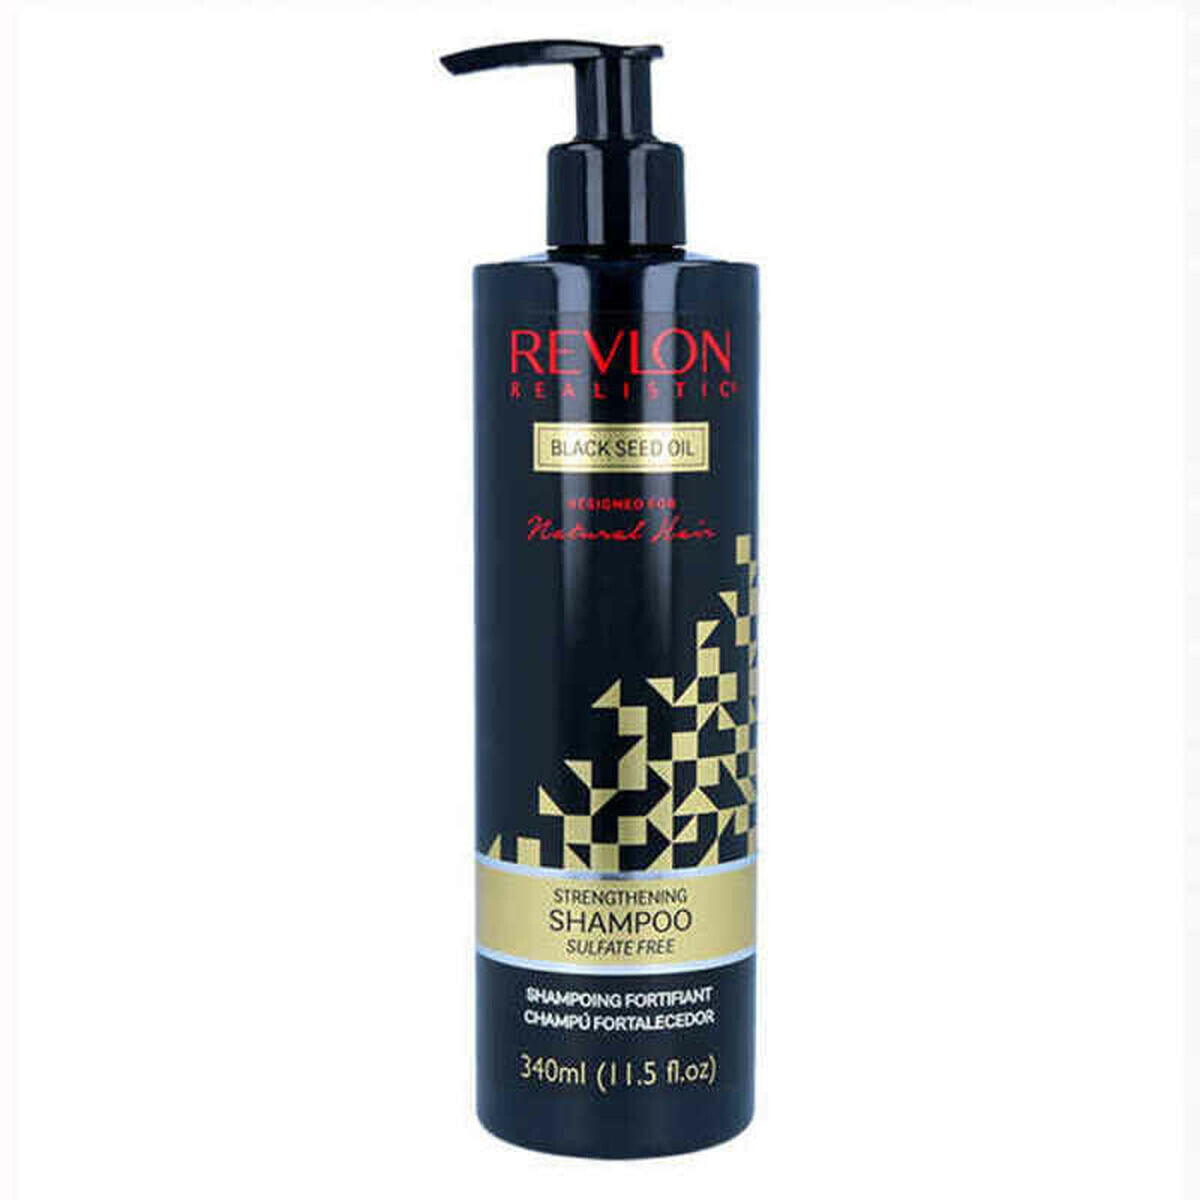 Shampoo and Conditioner Real Black Seed Strength Revlon 0616762940067 (340 ml)